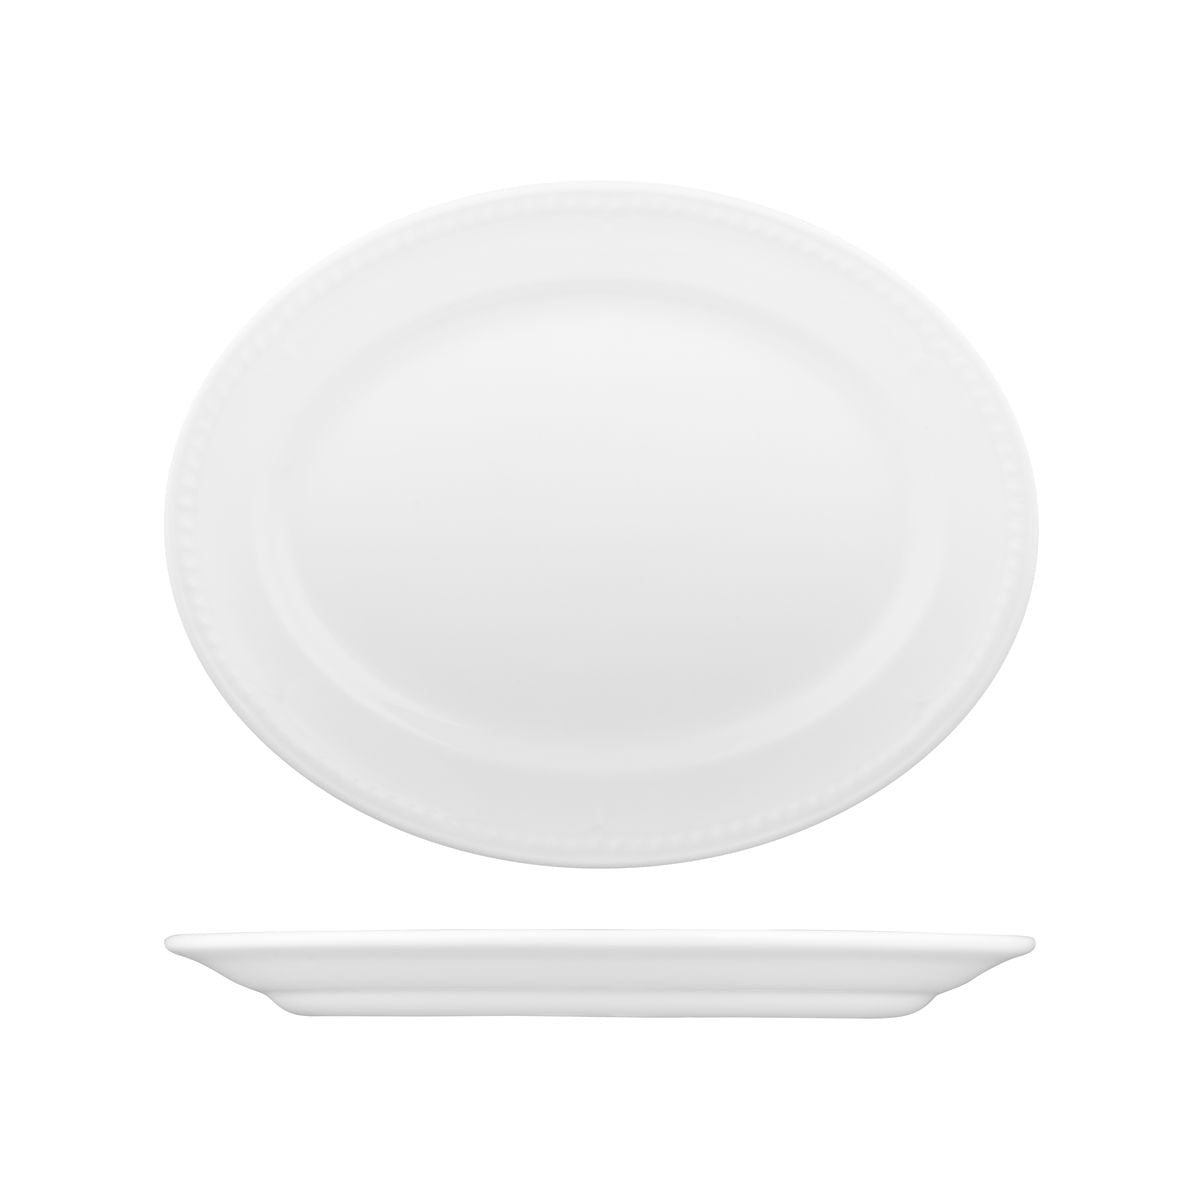 Oval Plate - 305mm, Buckingham from Churchill. Textured, made out of Porcelain and sold in boxes of 12. Hospitality quality at wholesale price with The Flying Fork! 